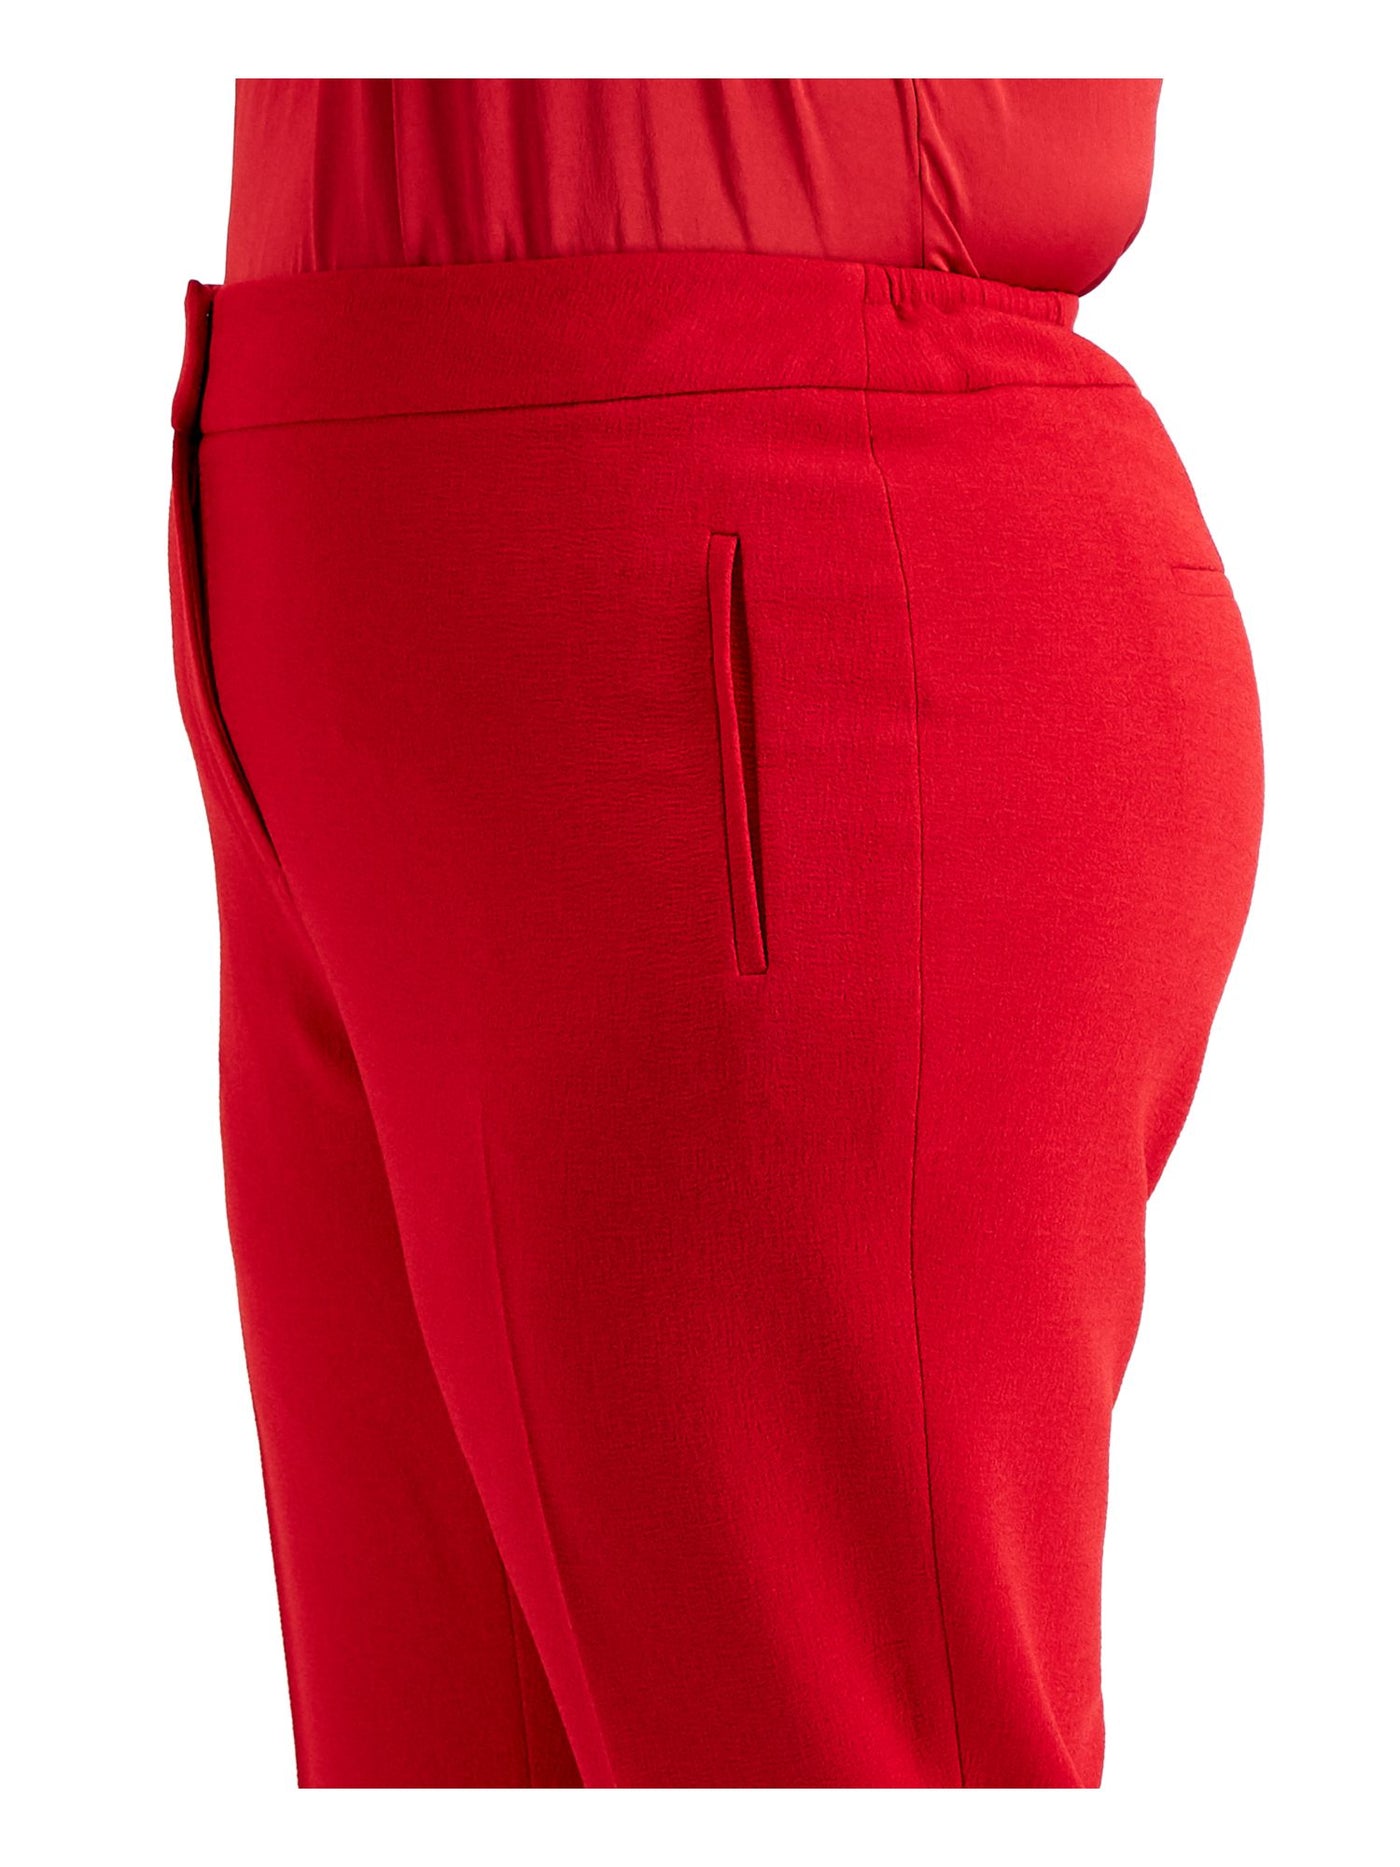 BAR III Womens Red Pocketed Zippered Textured High Rise Wear To Work Straight leg Pants Plus 20W